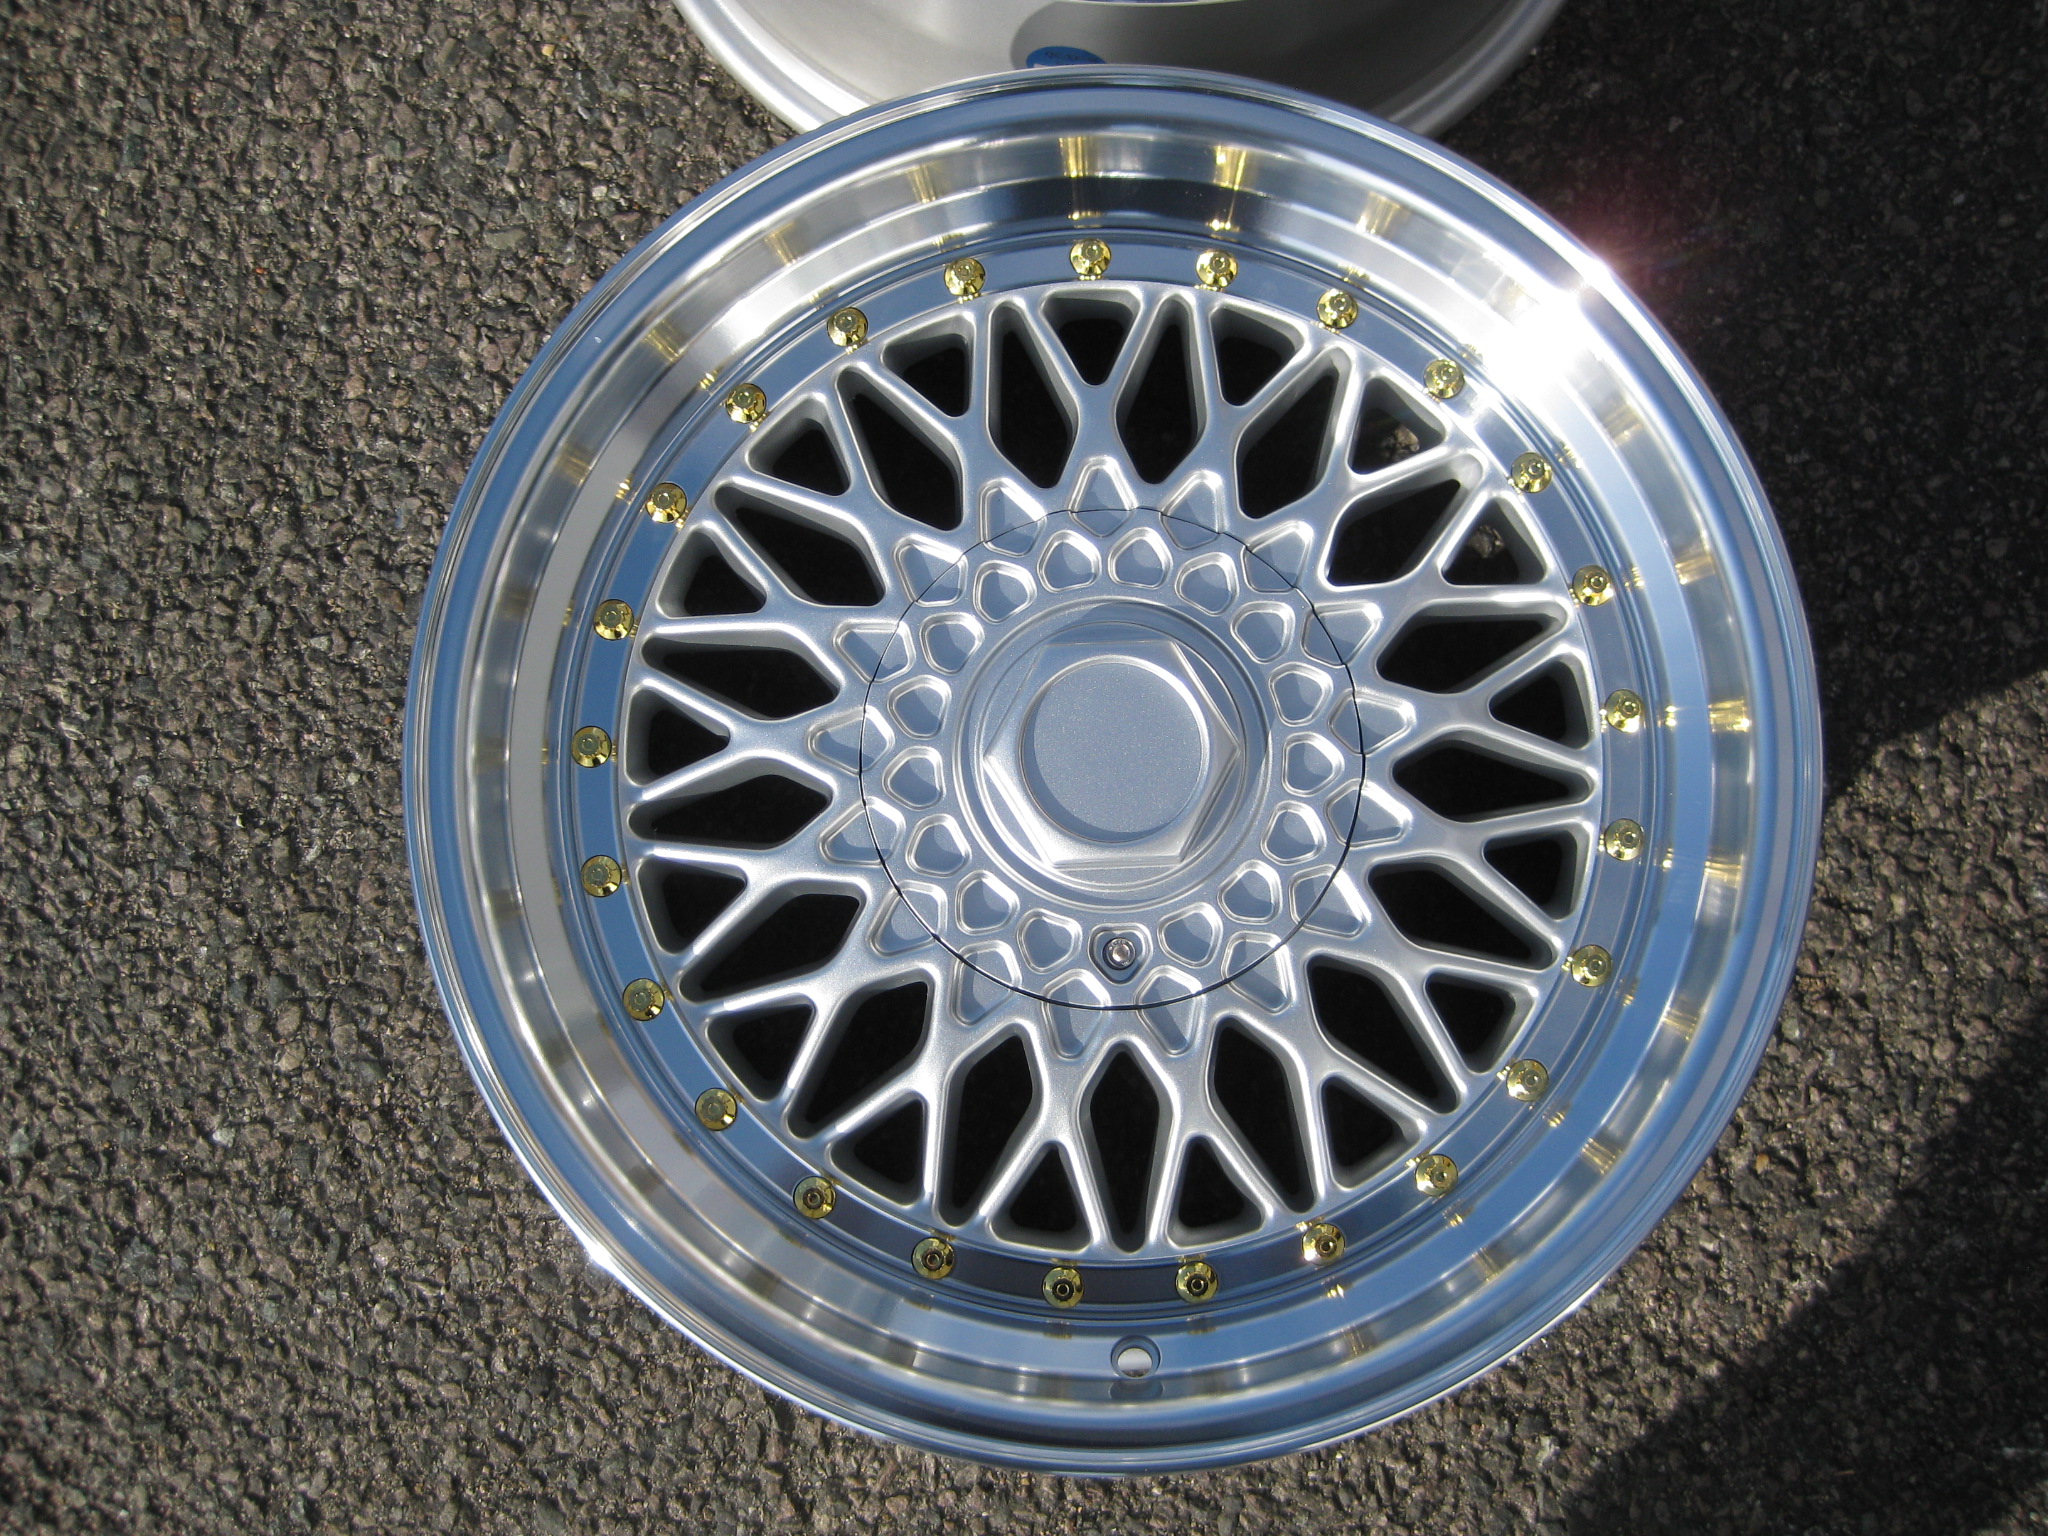 NEW 17" DARE RS ALLOY WHEELS IN SILVER WITH GOLD RIVETS, DEEPER DISH 8.5" REAR. et30/30